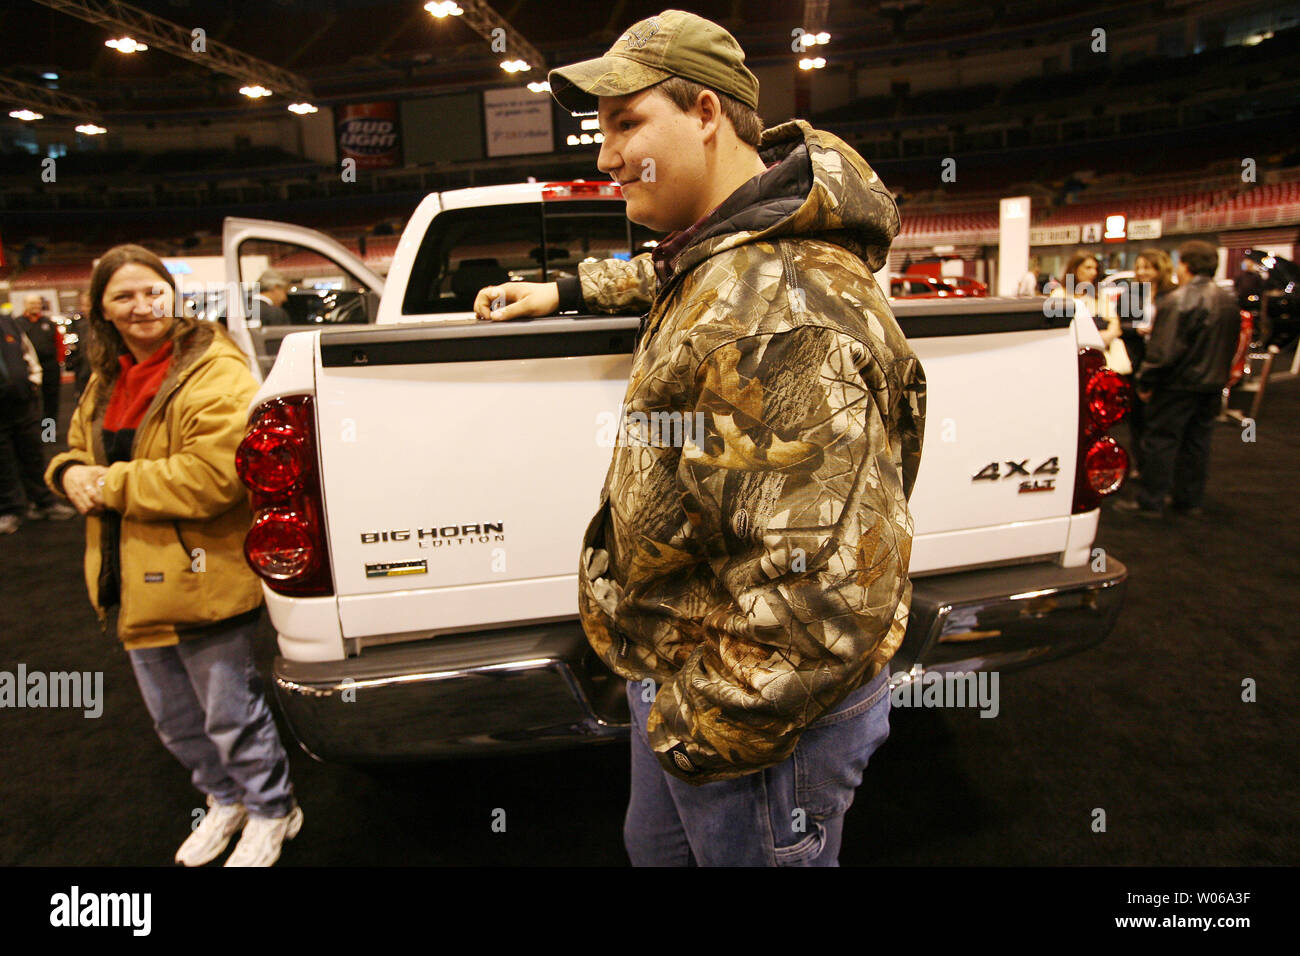 Mitchell Hults, the 15-year-old who identified the get-a-way vehicle used by kidnapper Michael Devlin to kidnap Ben Ownby on January 8, 2007, stands at the rear of the new truck given to him as a reward by Chrysler at the St. Louis Auto Show while mom Sherri Hults looks on in St. Louis on January 24, 2007. Although only 15, Hults will turn 16 in six months and plans to use it to haul his  ATV. (UPI Photo/Bill Greenblatt) Stock Photo